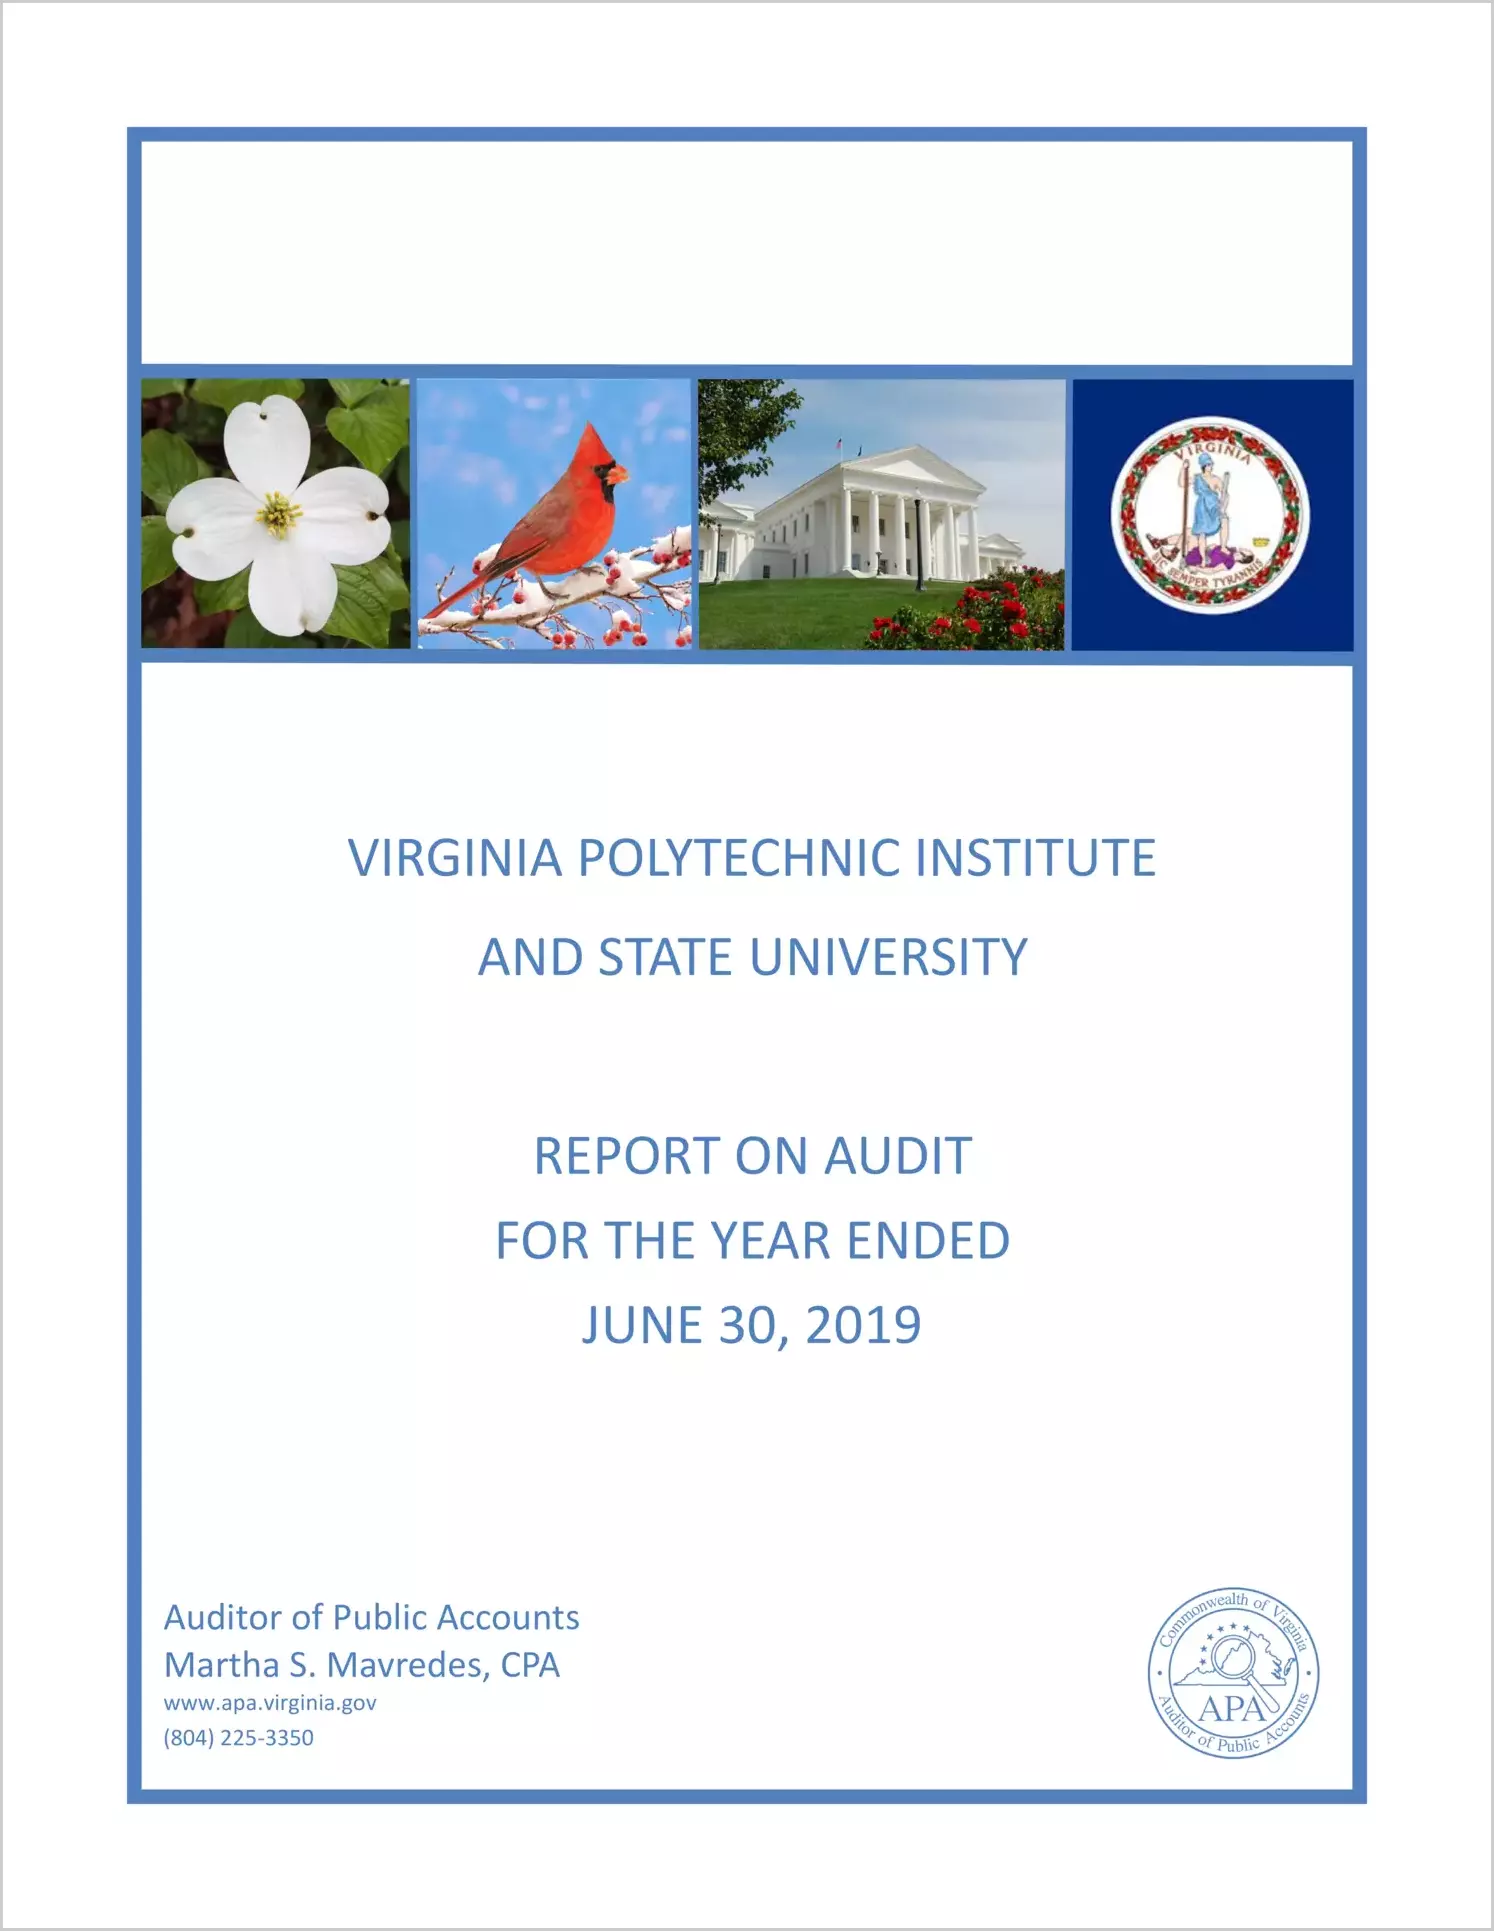 Virginia Polytechnic Institute and State University for the year ended June 30, 2019